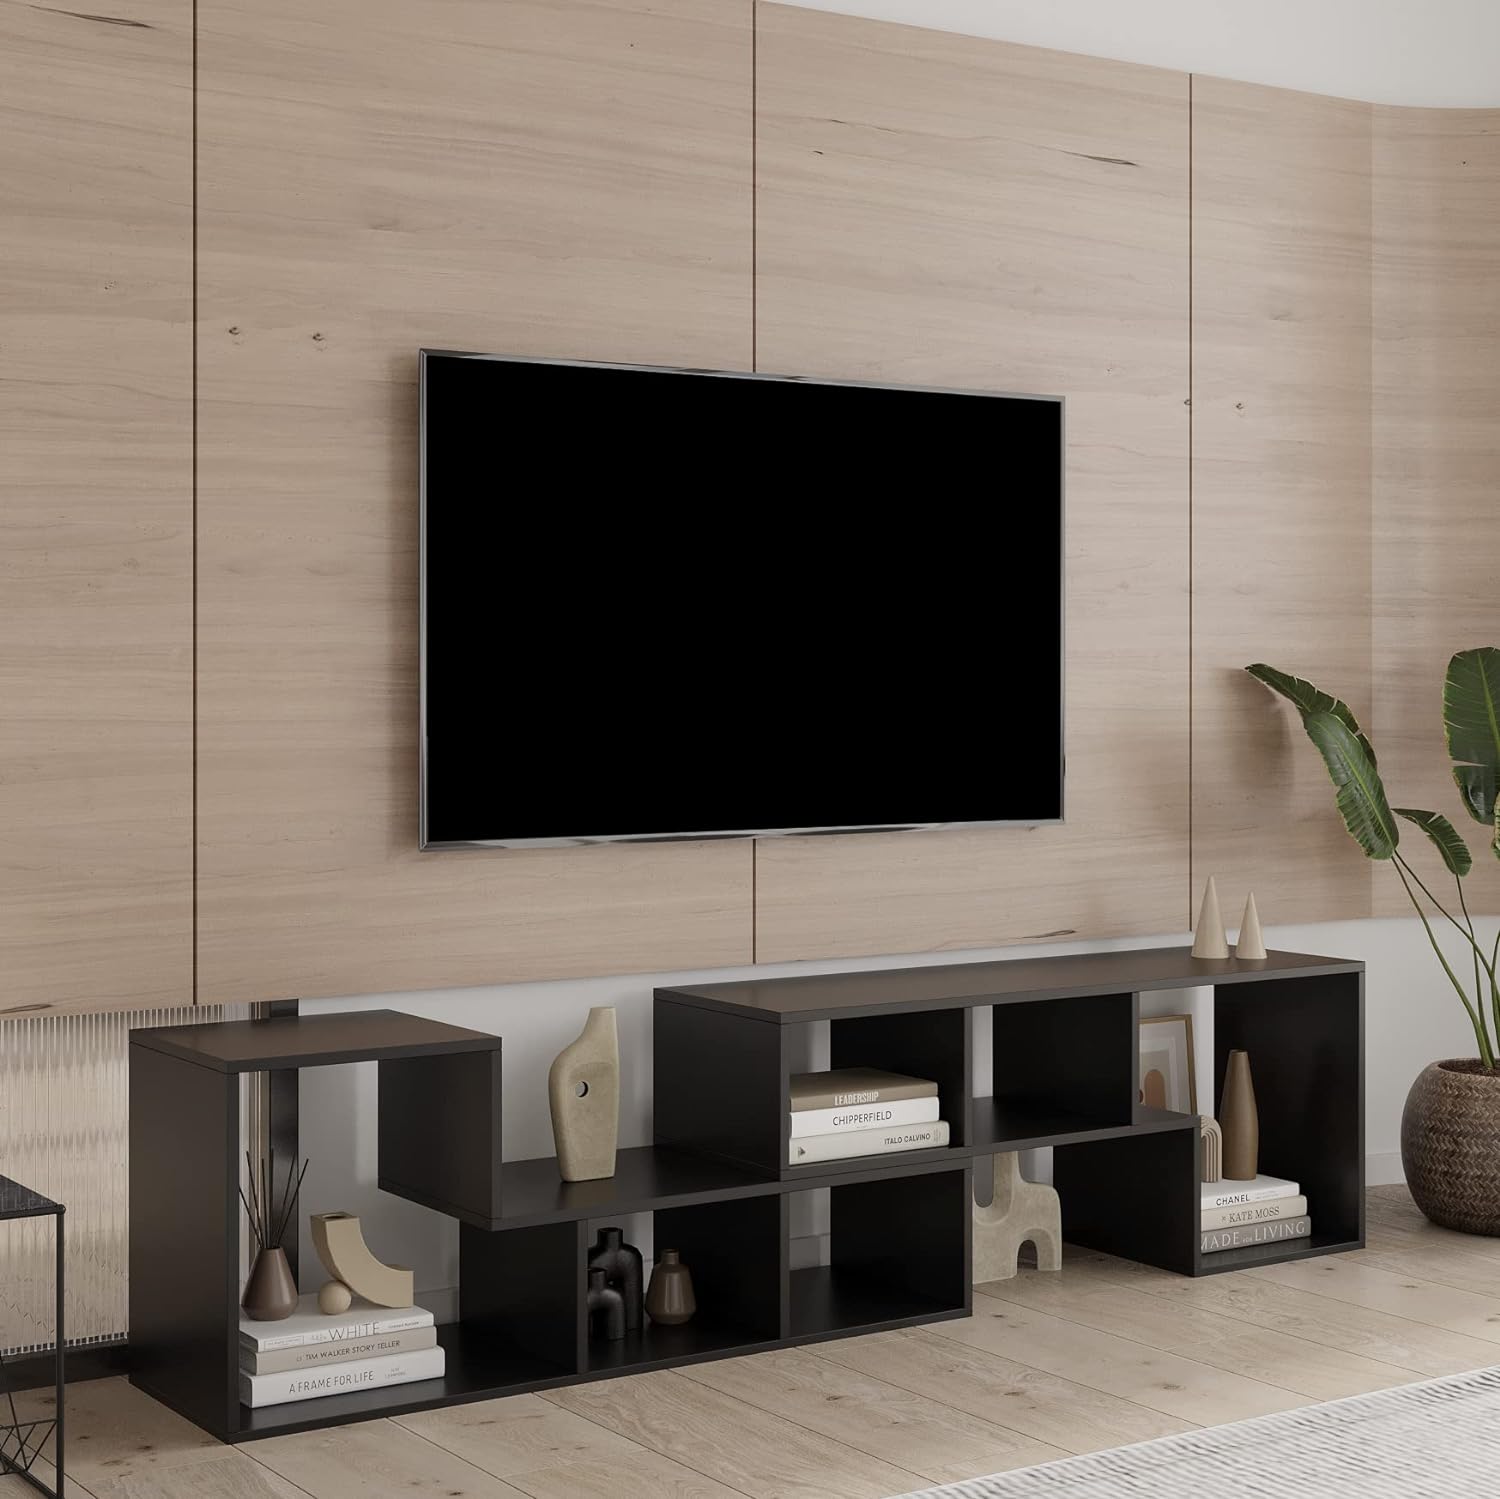 Double 41" L-Shaped TV Stand, Modern Entertainment Center Media Stand with Open Storage Shelves